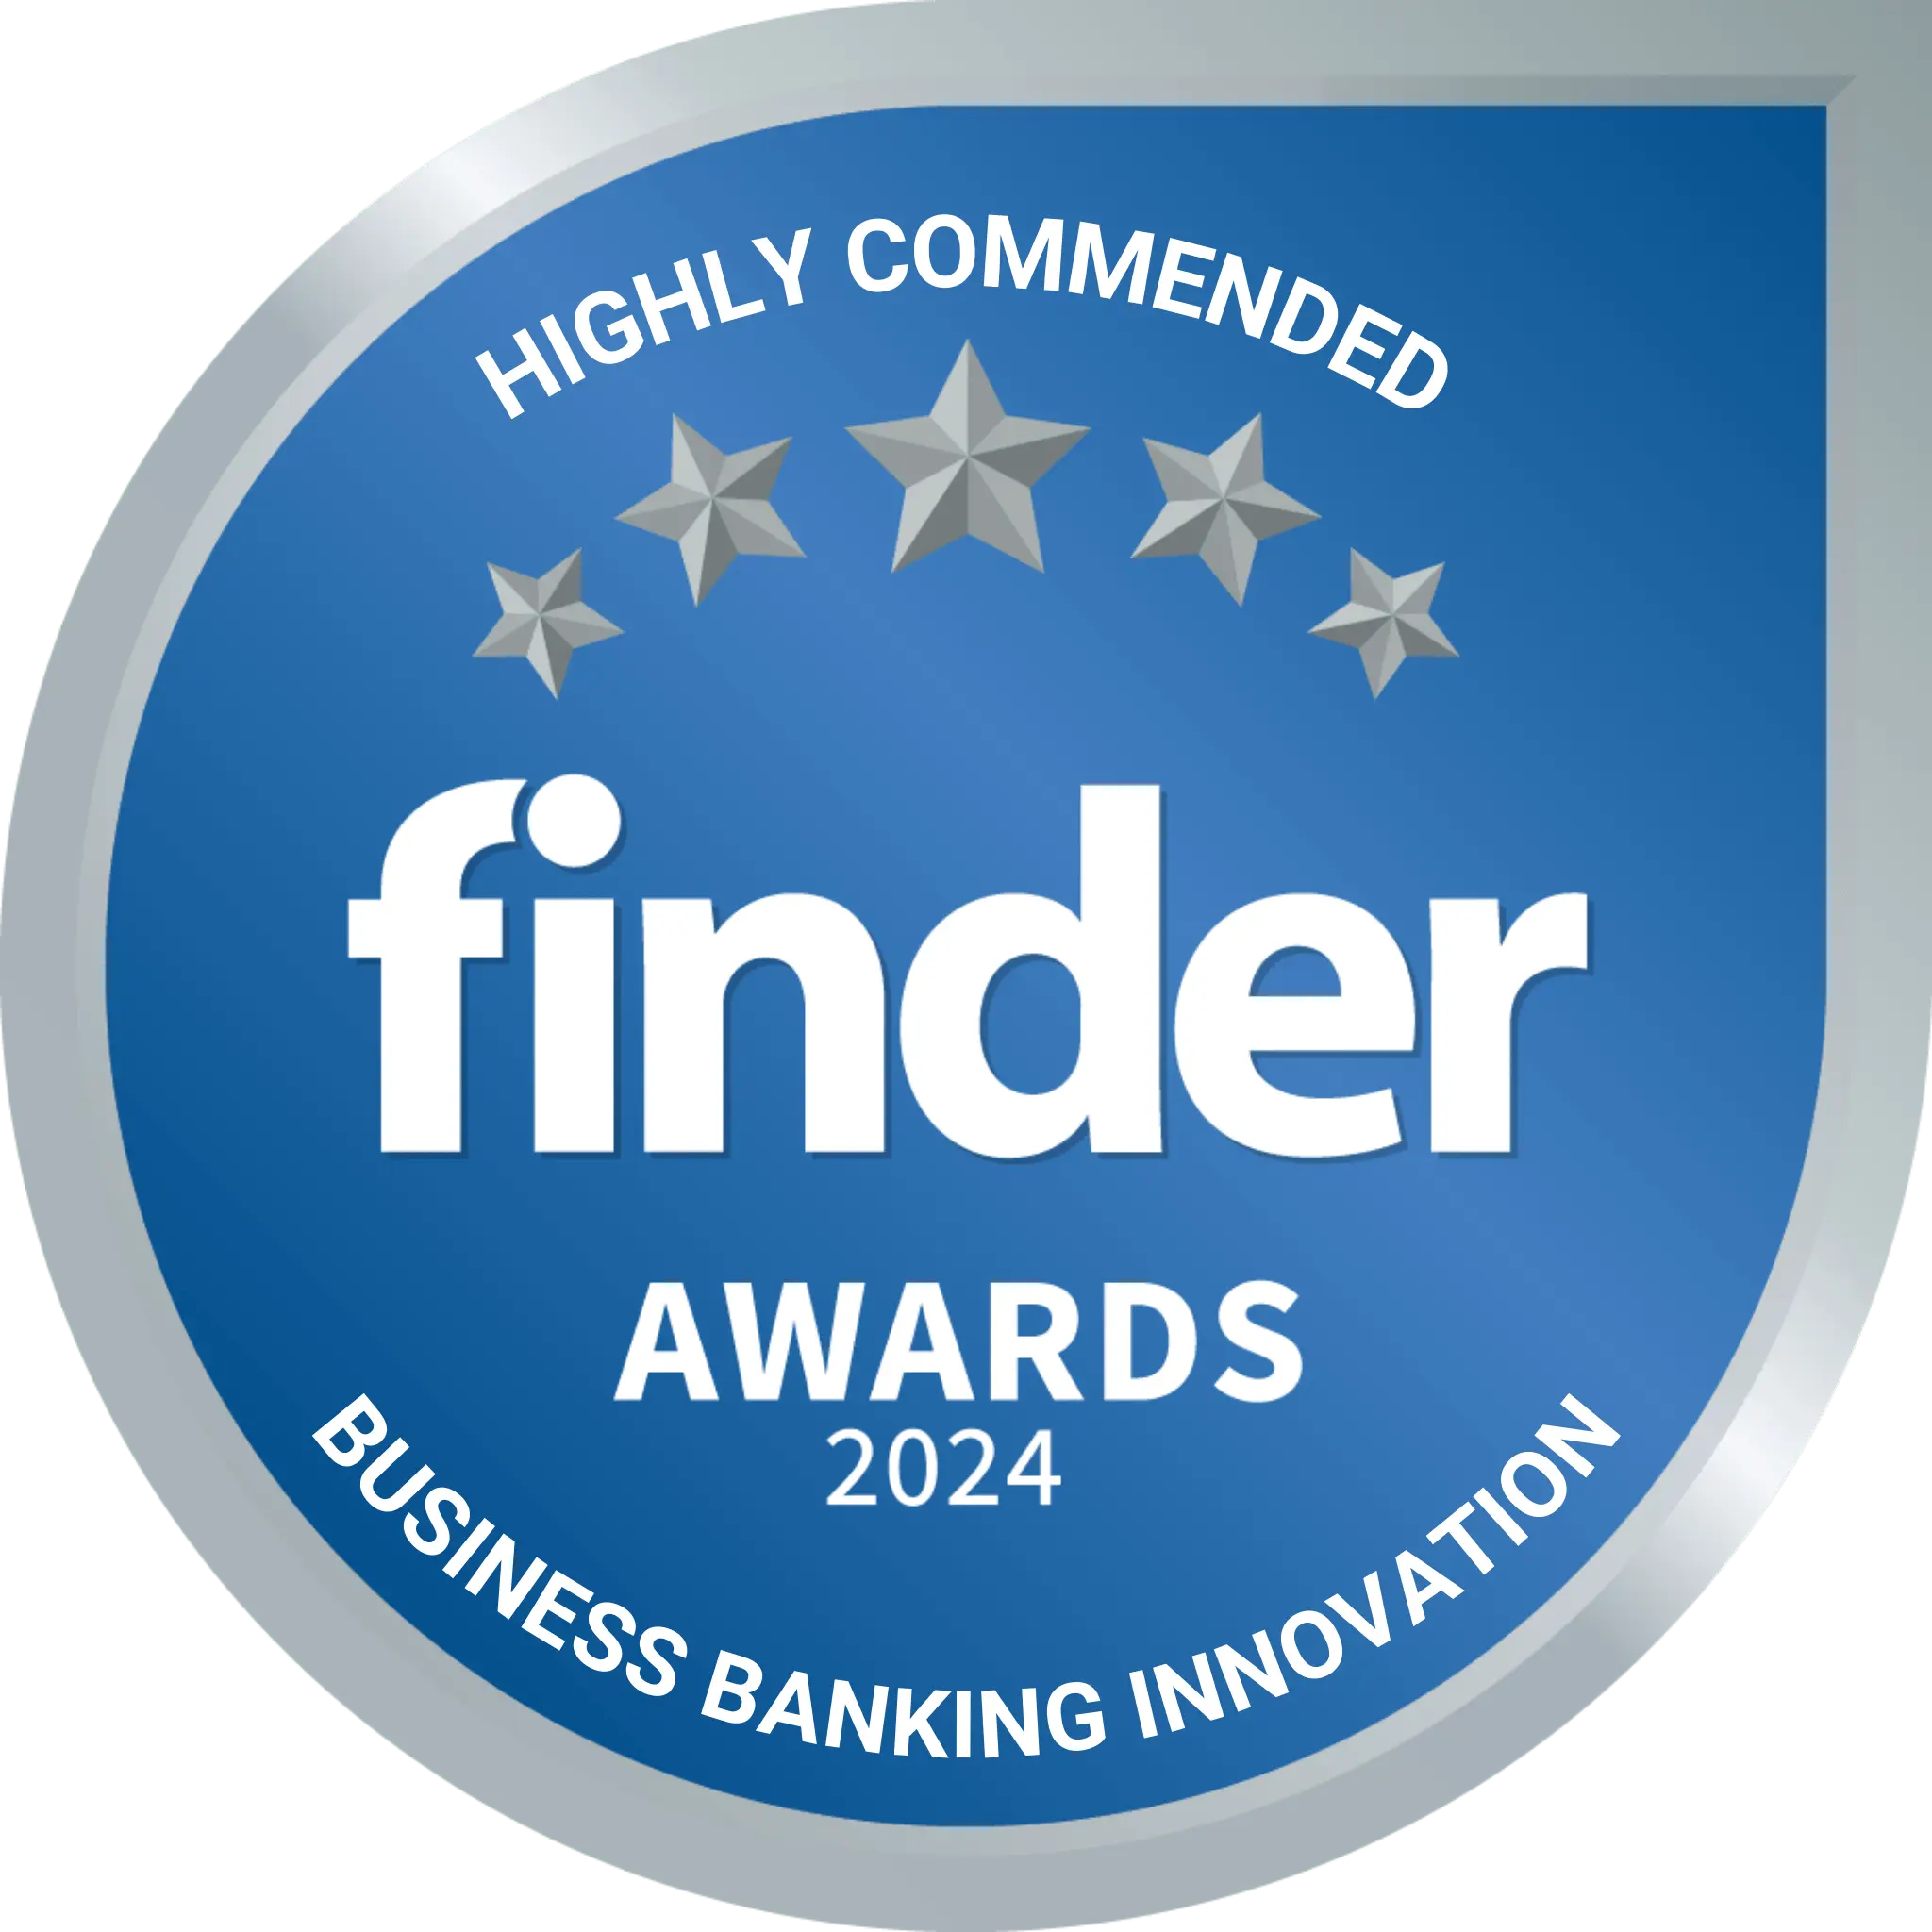 Highly Commended Business Banking Innovation